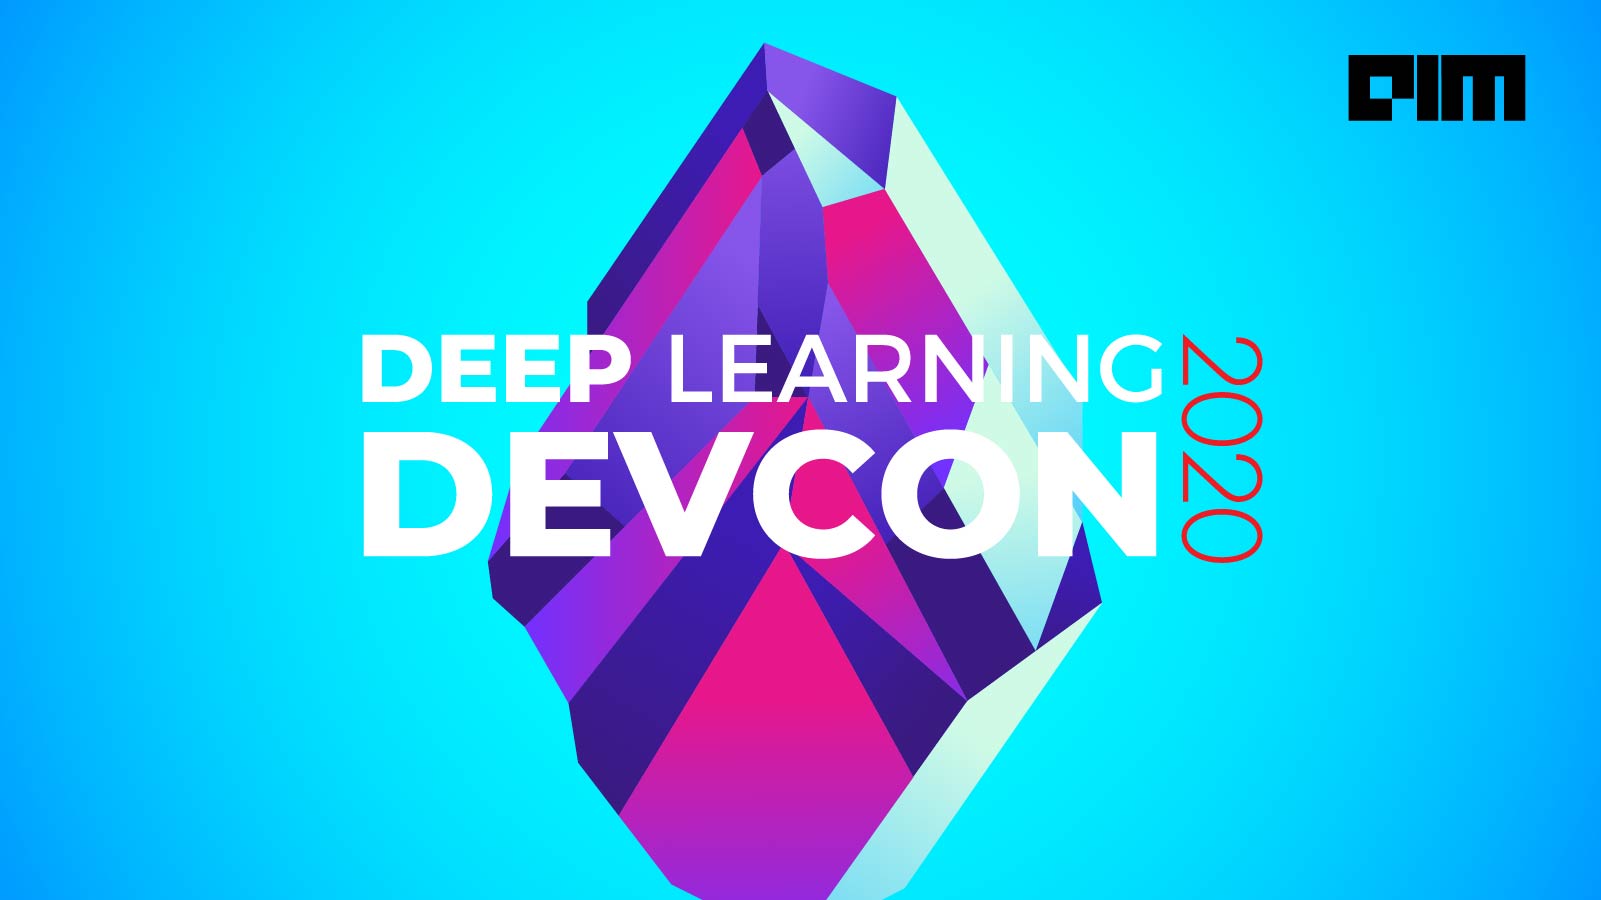 Here’s Why You Must Attend The DLDC 2020 — The Deep Learning Conference Of The Year